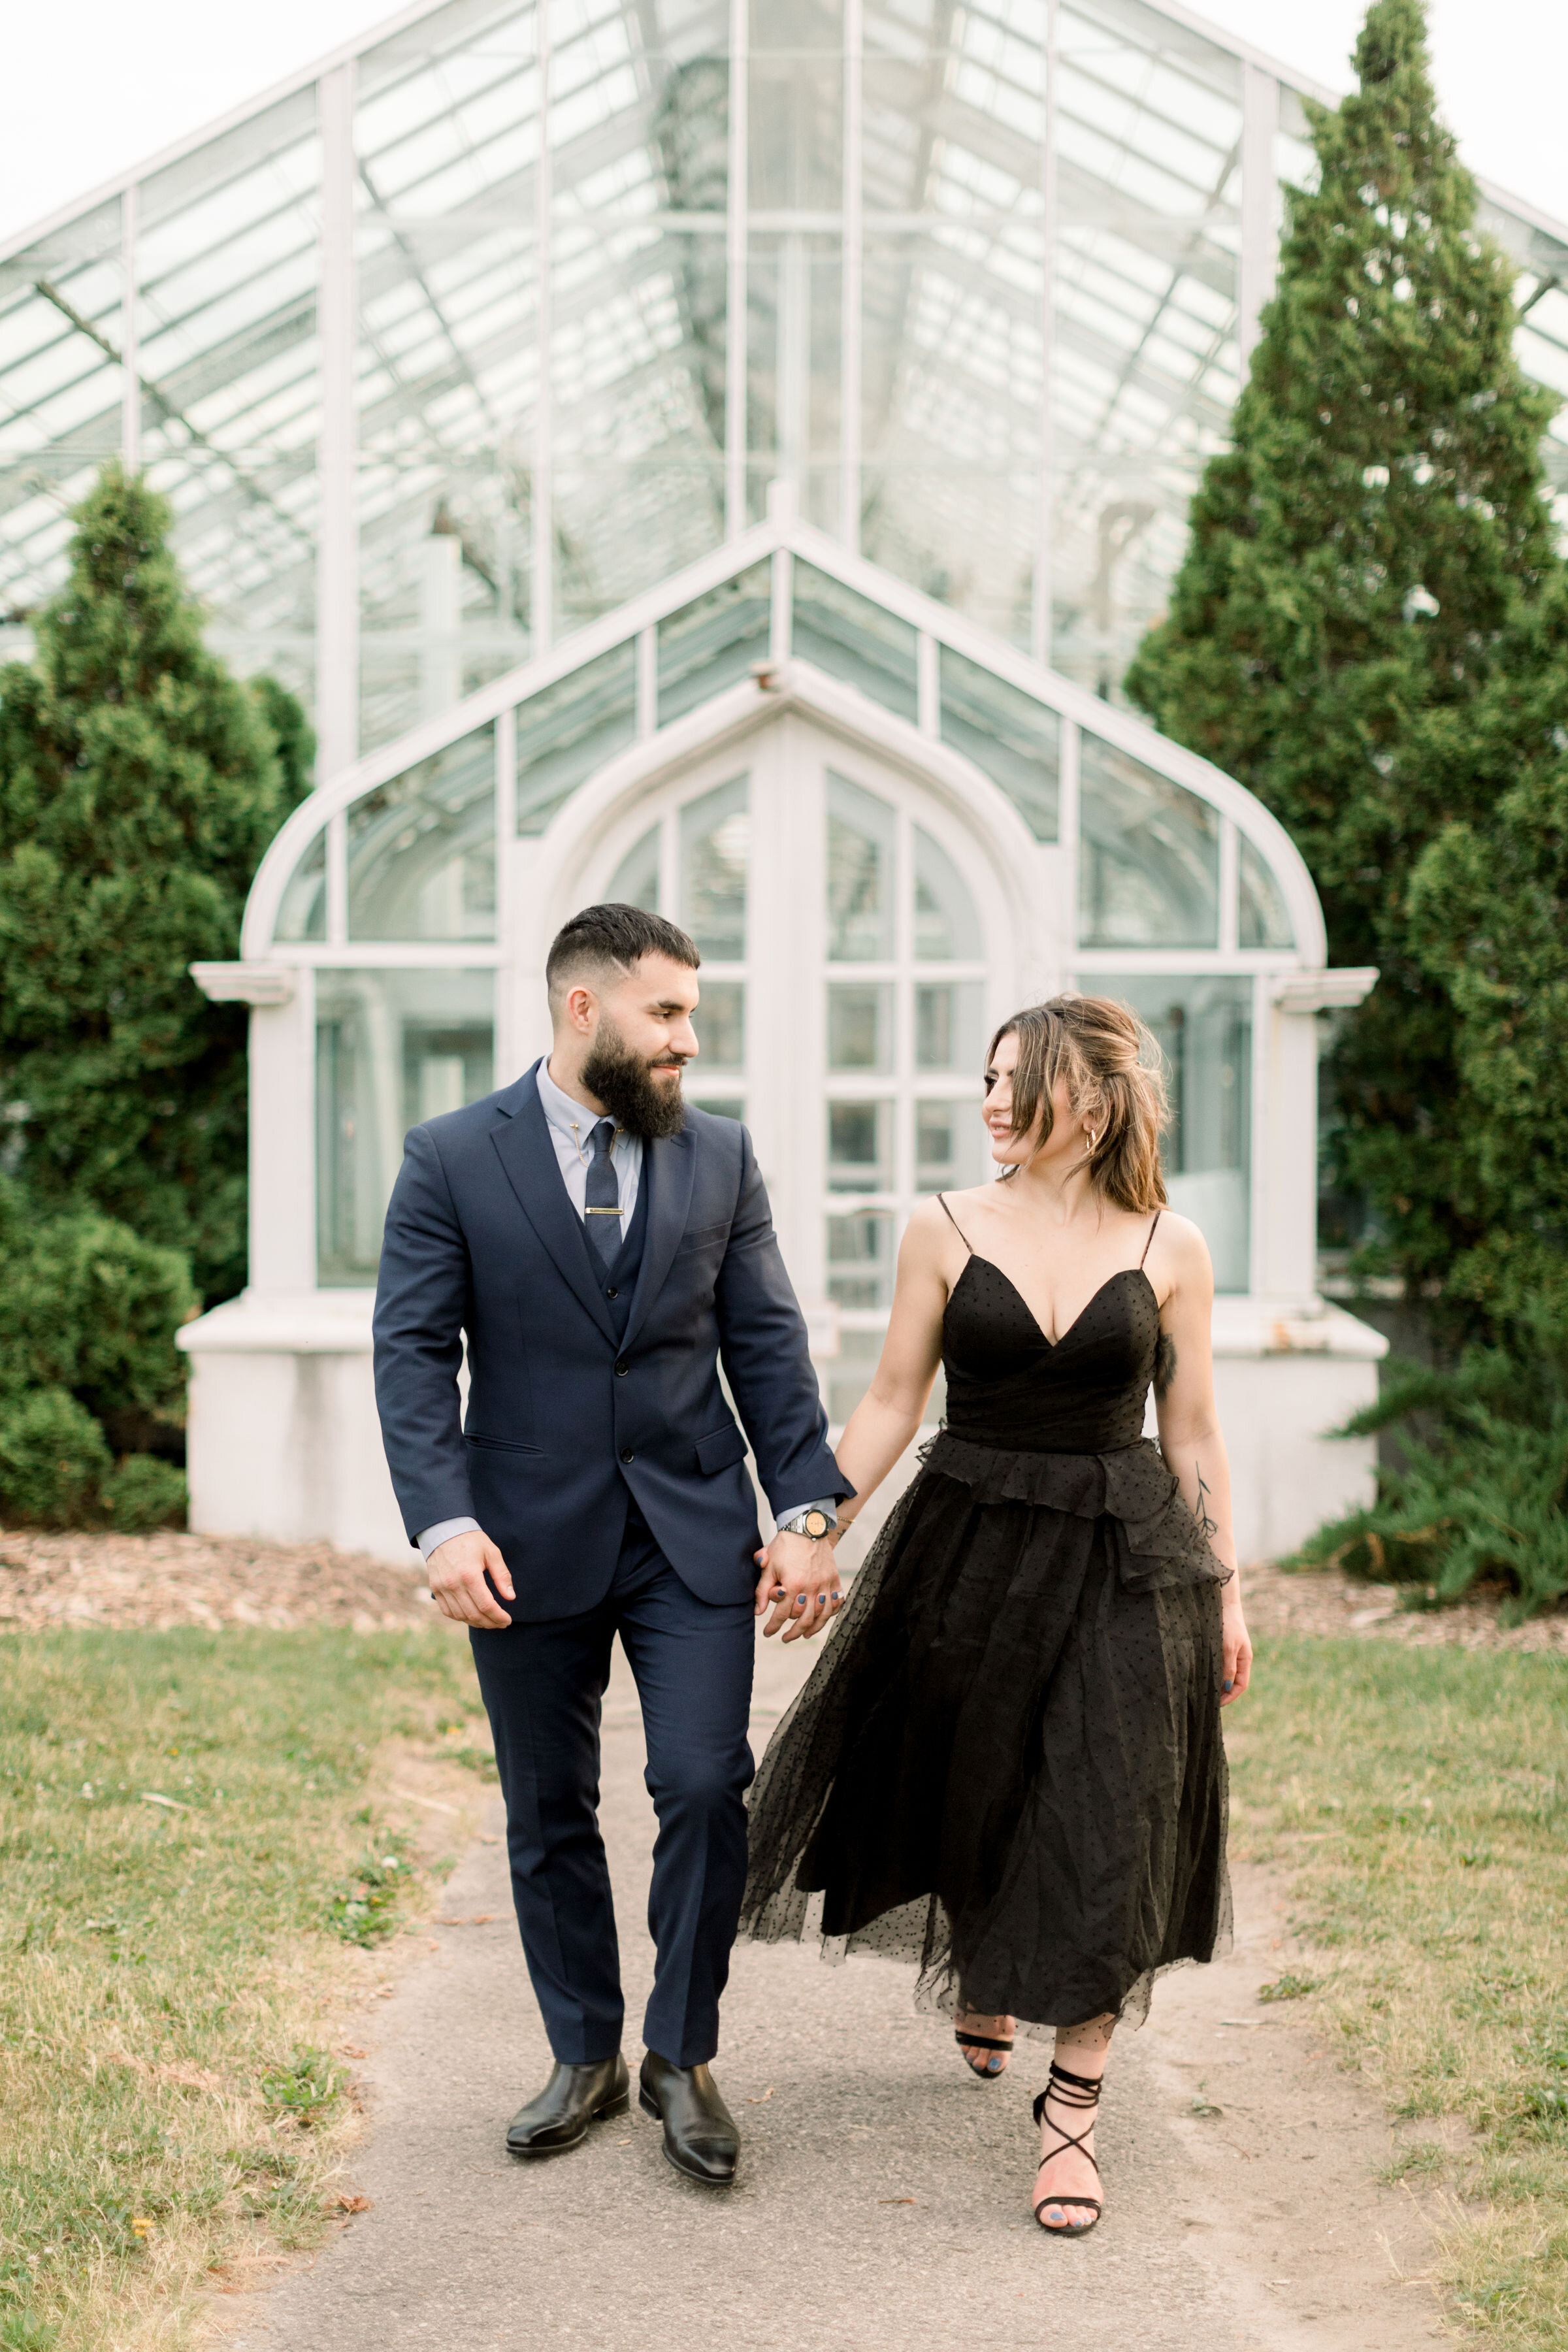  Chelsea Mason Photography captures this engaged couple walking hand-in-hand outside a beautiful white greenhouse in Ottawa, Ontario. greenhouse engagement session formal engagement outfit women's black spaghetti strapped tea length dress with scrapp